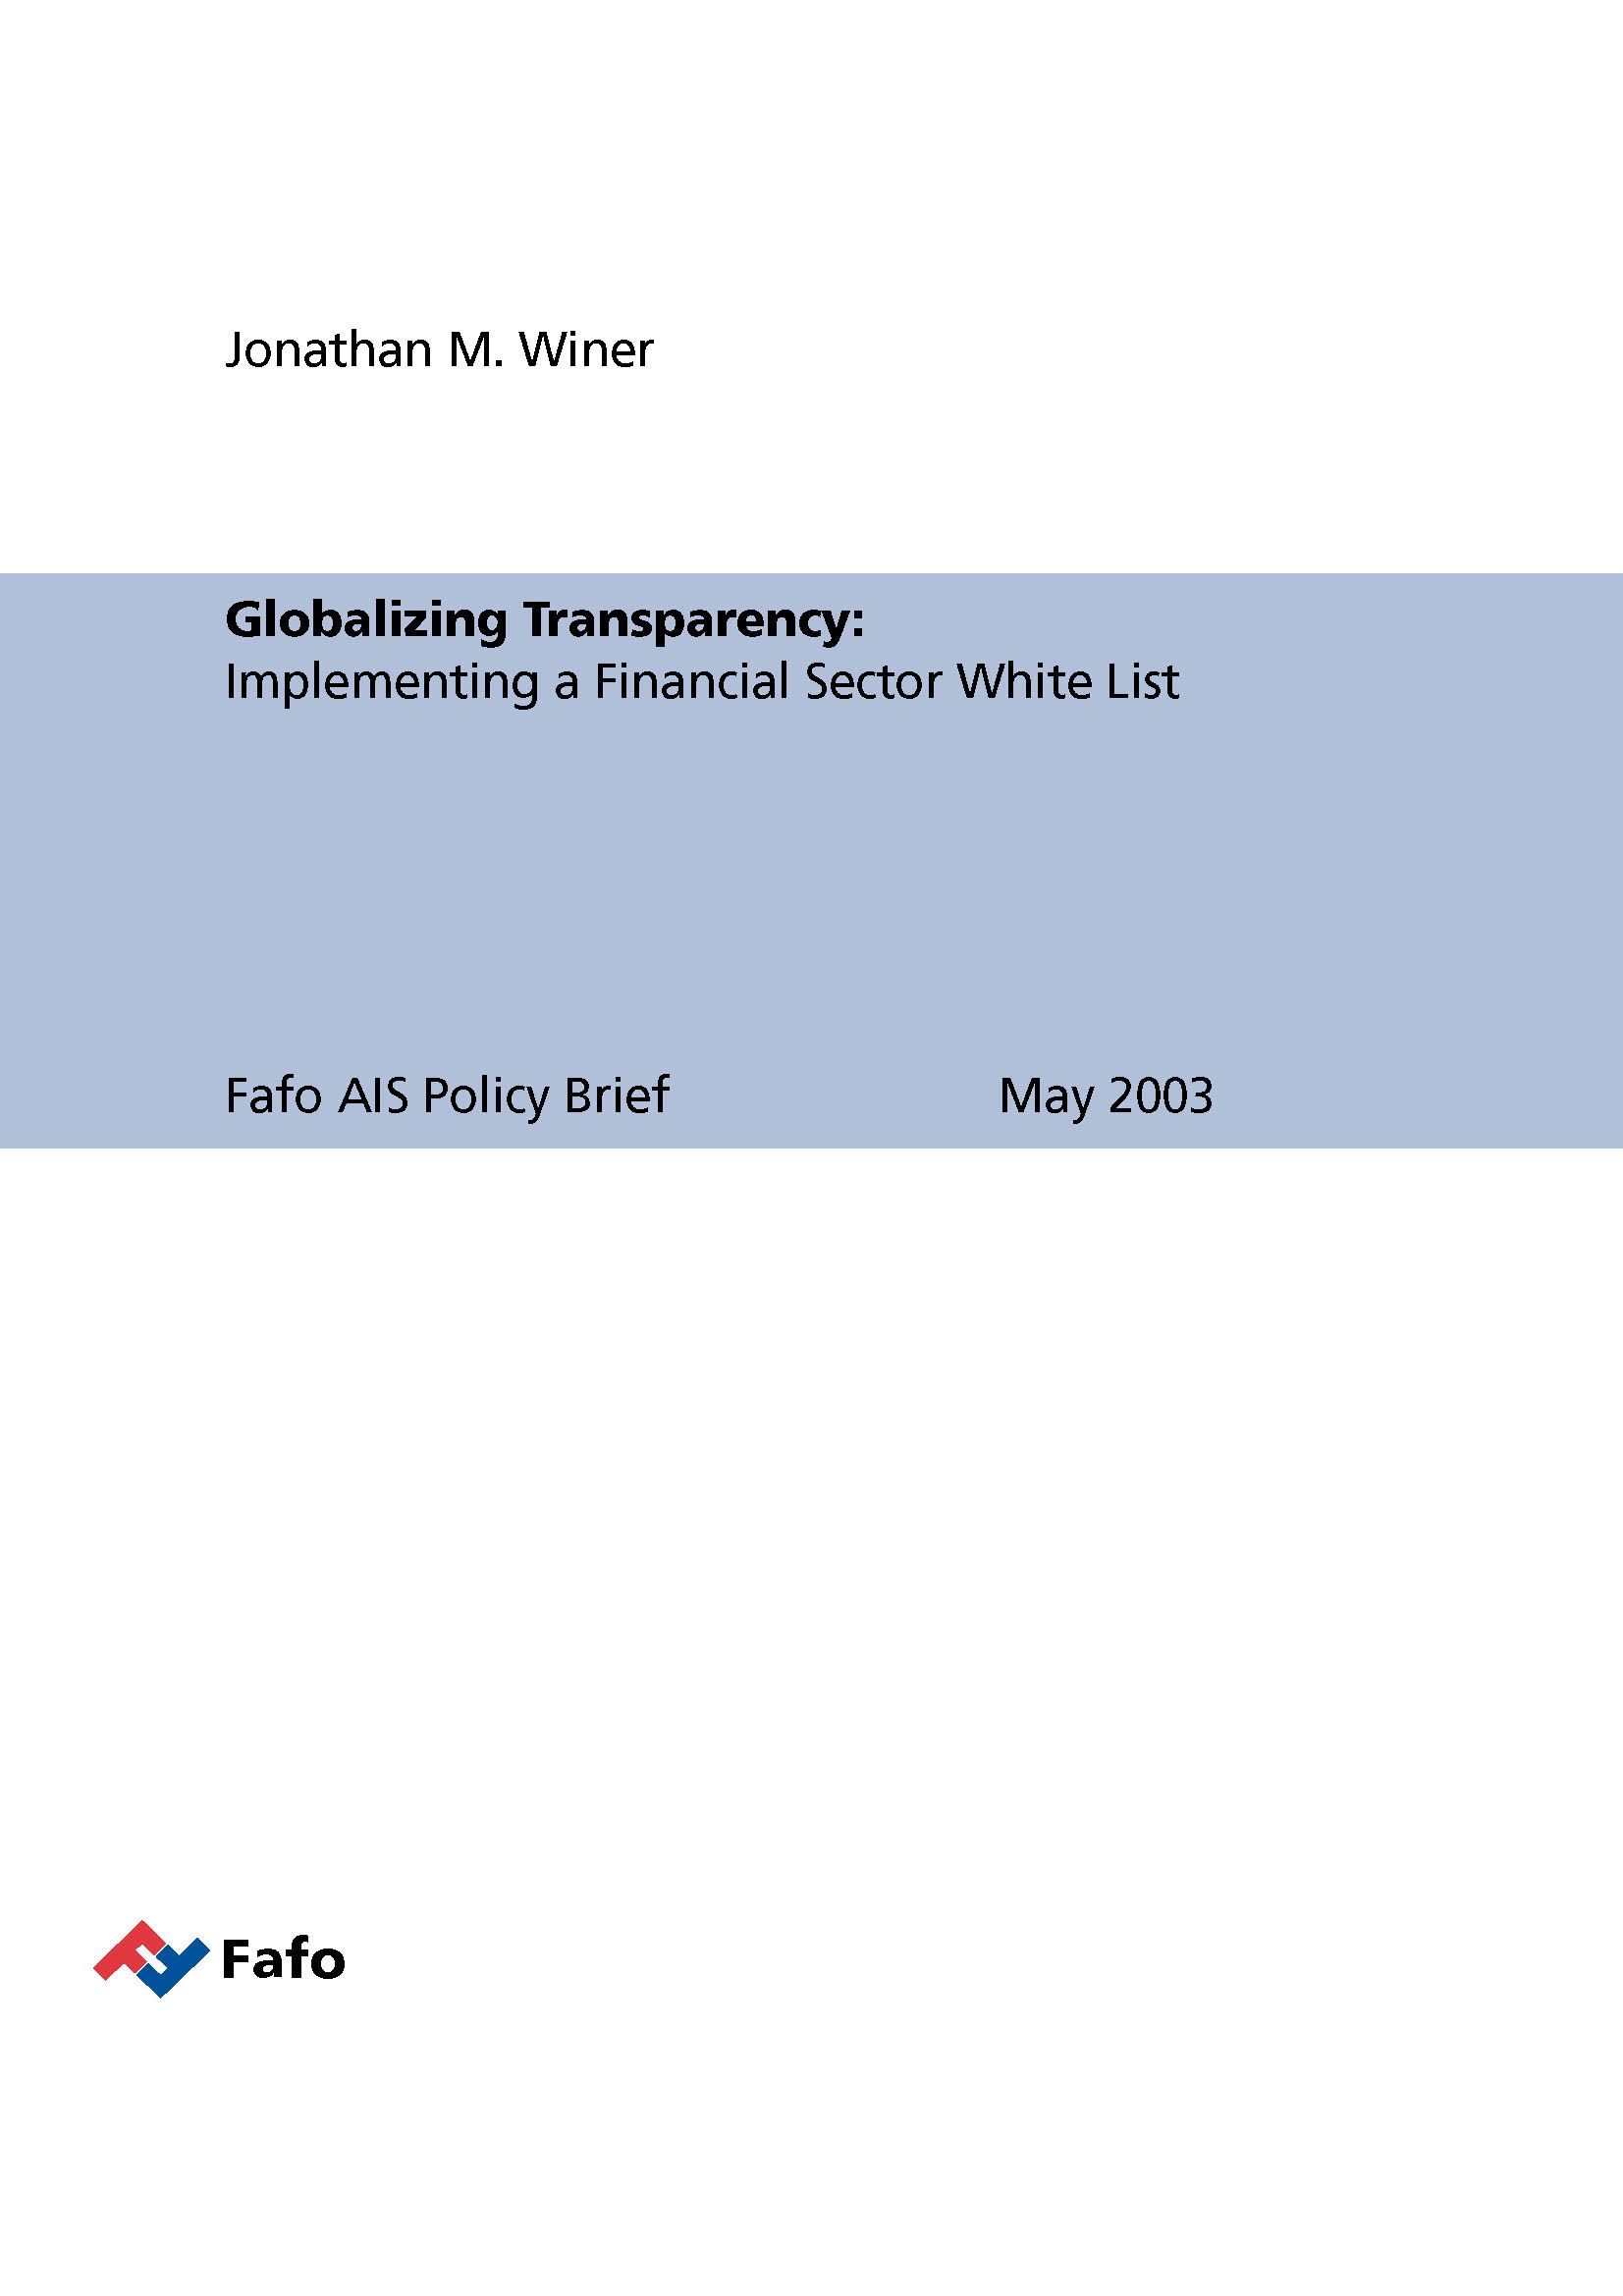 Globalizing Transparency: